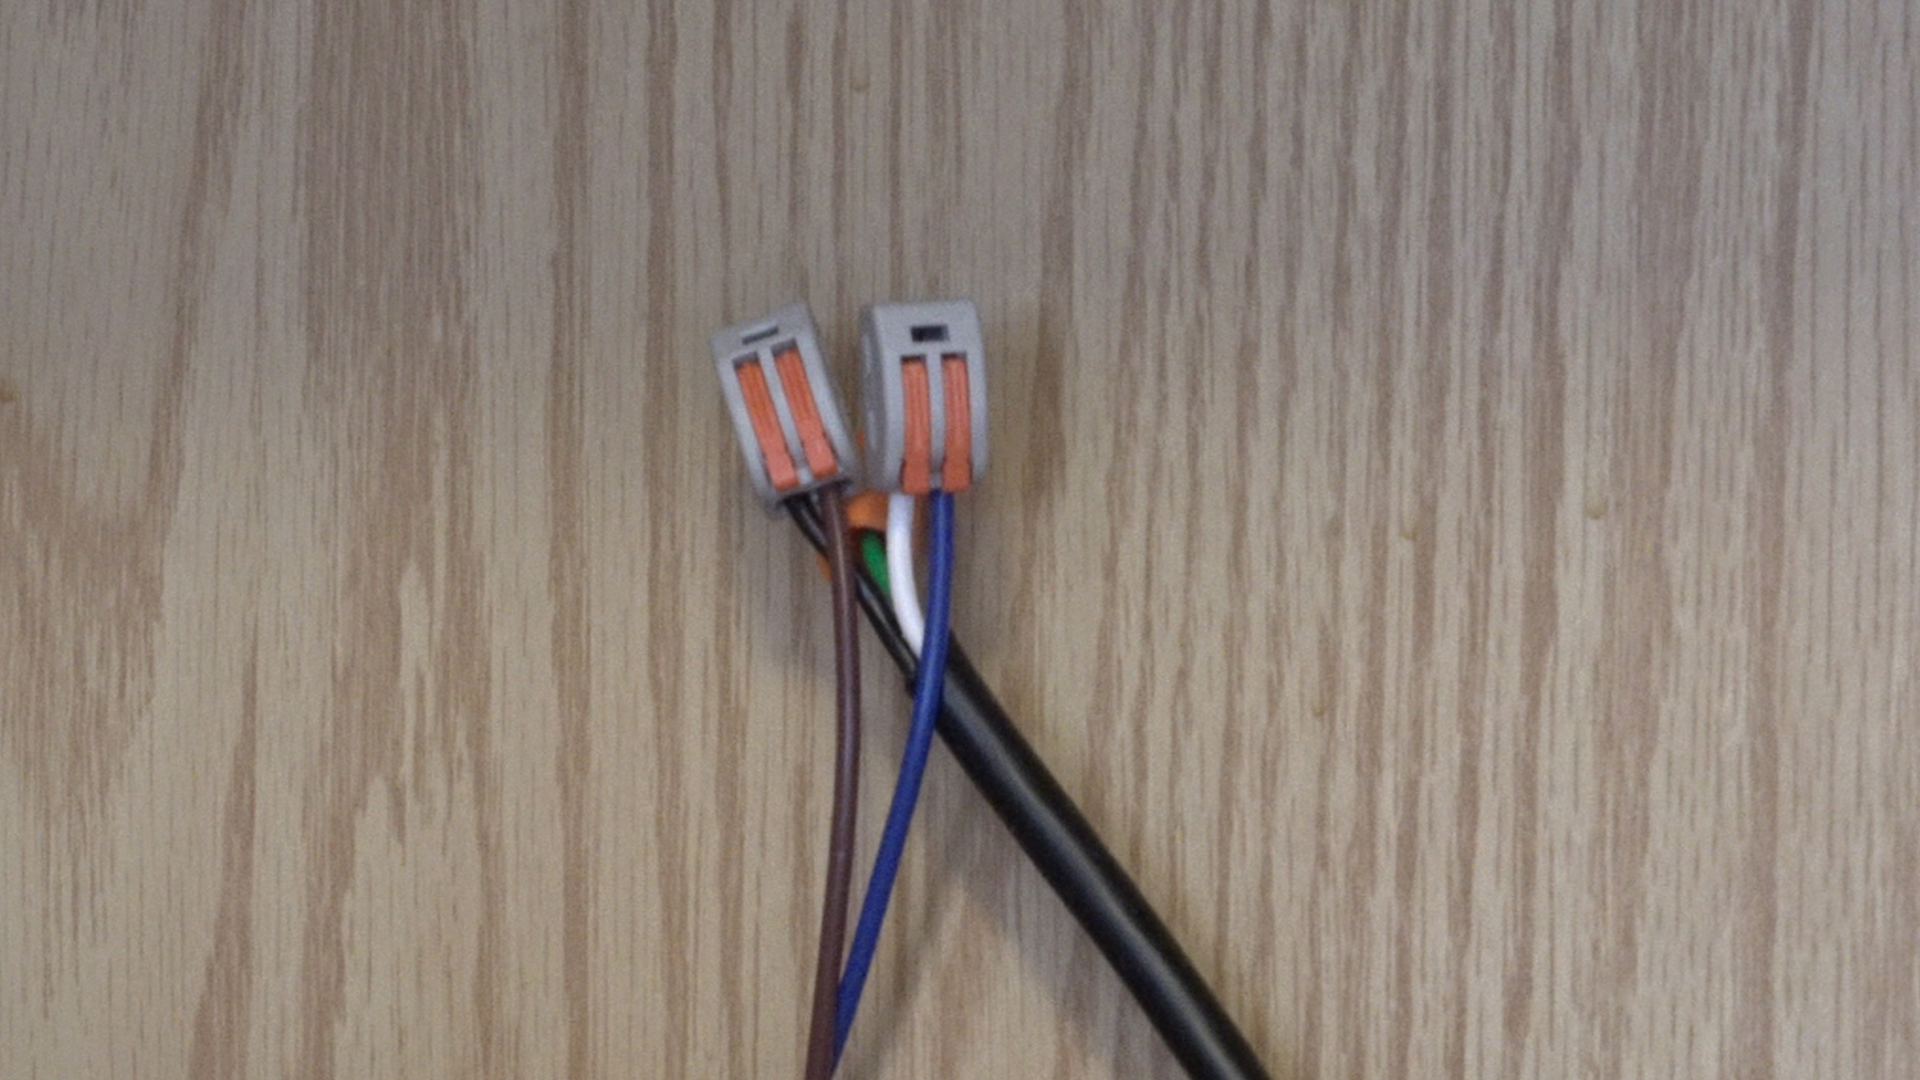 Above-Cabinet and Under-Cabinet LED Lighting: How to Install LED Strip Lights - step 3